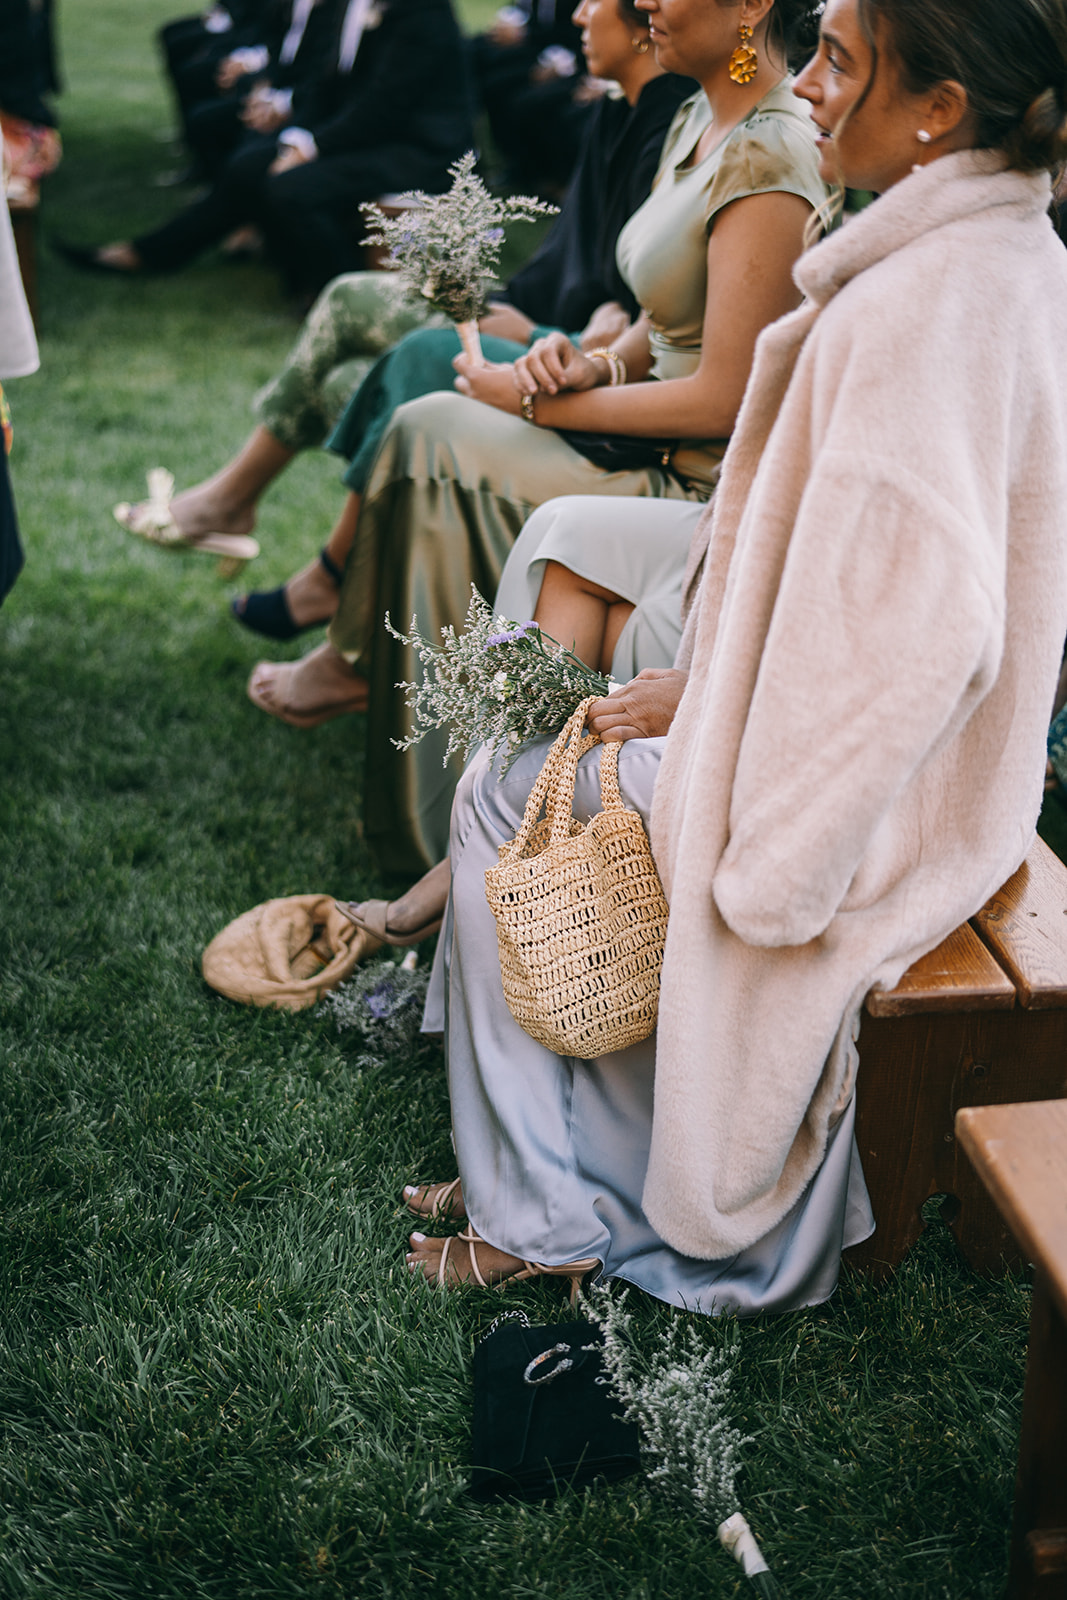 Women sitting on a bench with their legs crossed holding flowers, one has a wicker purse